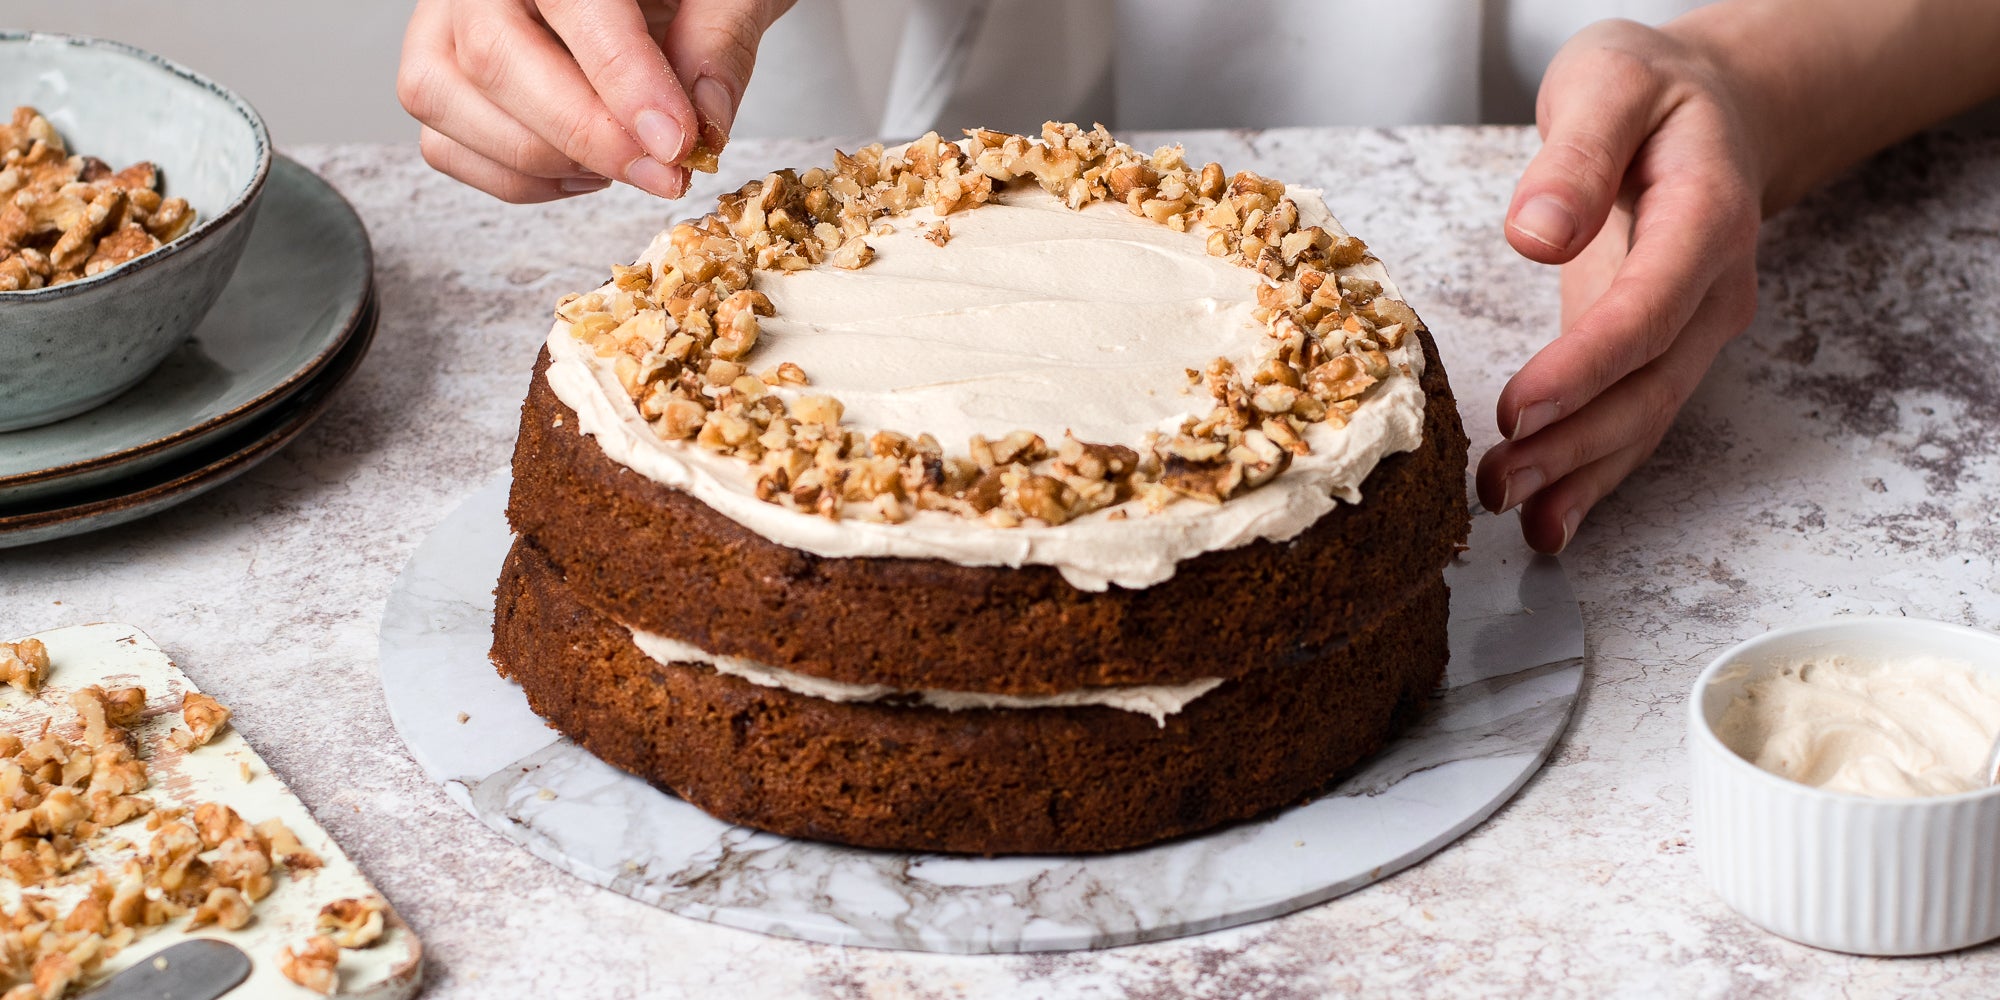 Gluten Free Vegan Coffee Cake being hand decorated with chopped nuts